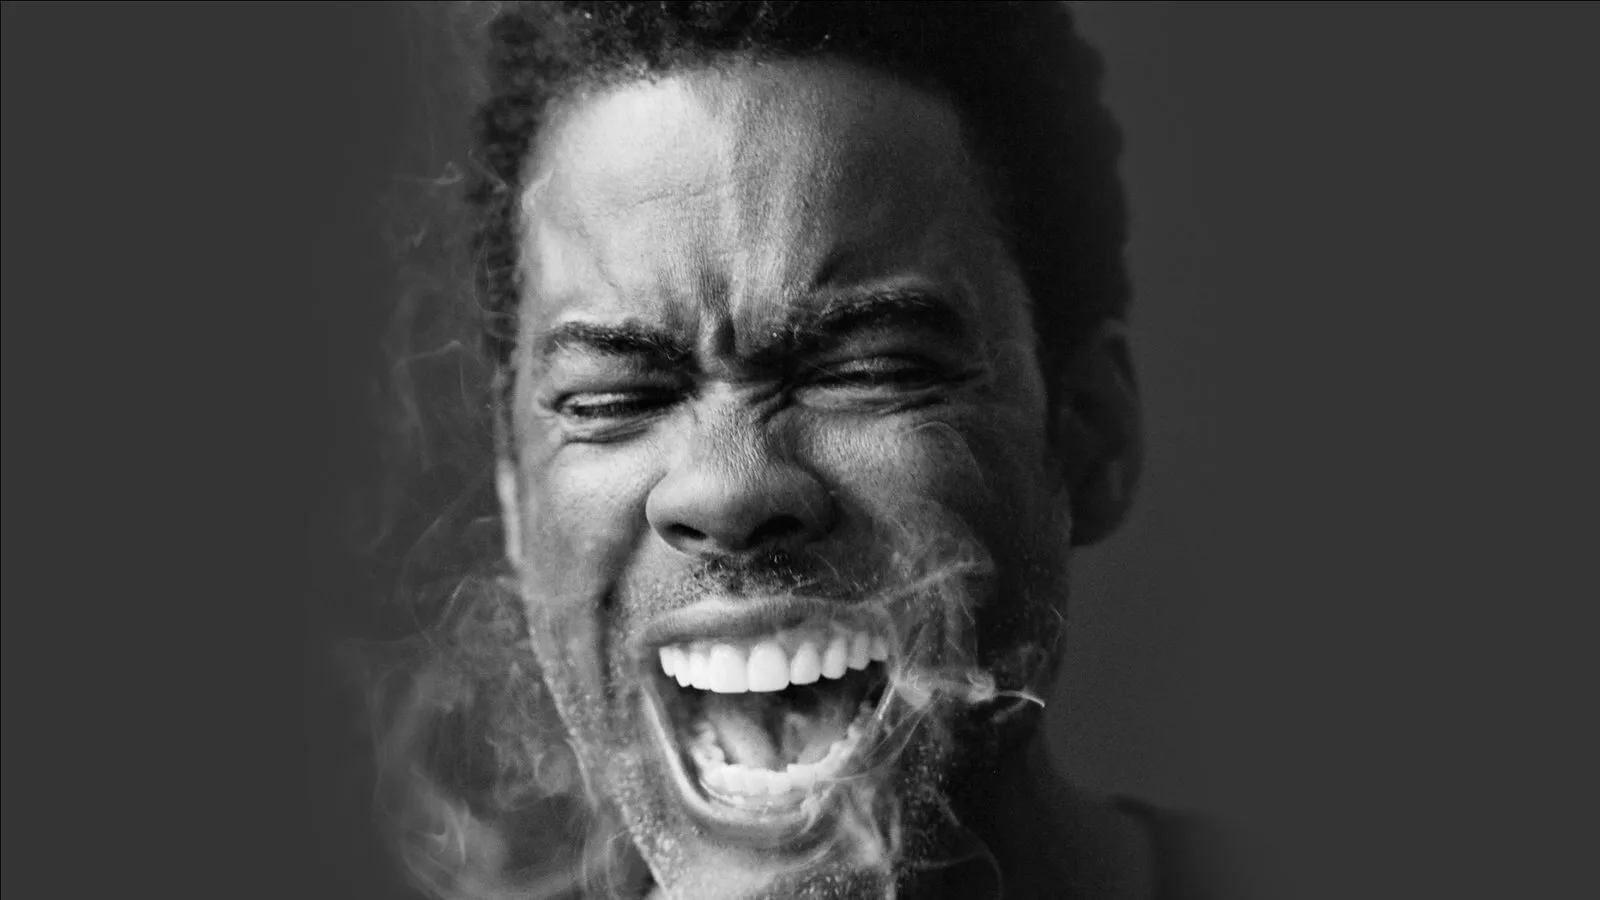 A promotional photo for Chris Rock's current tour, featuring a photo of Chris Rock with smoke coming out of his mouth